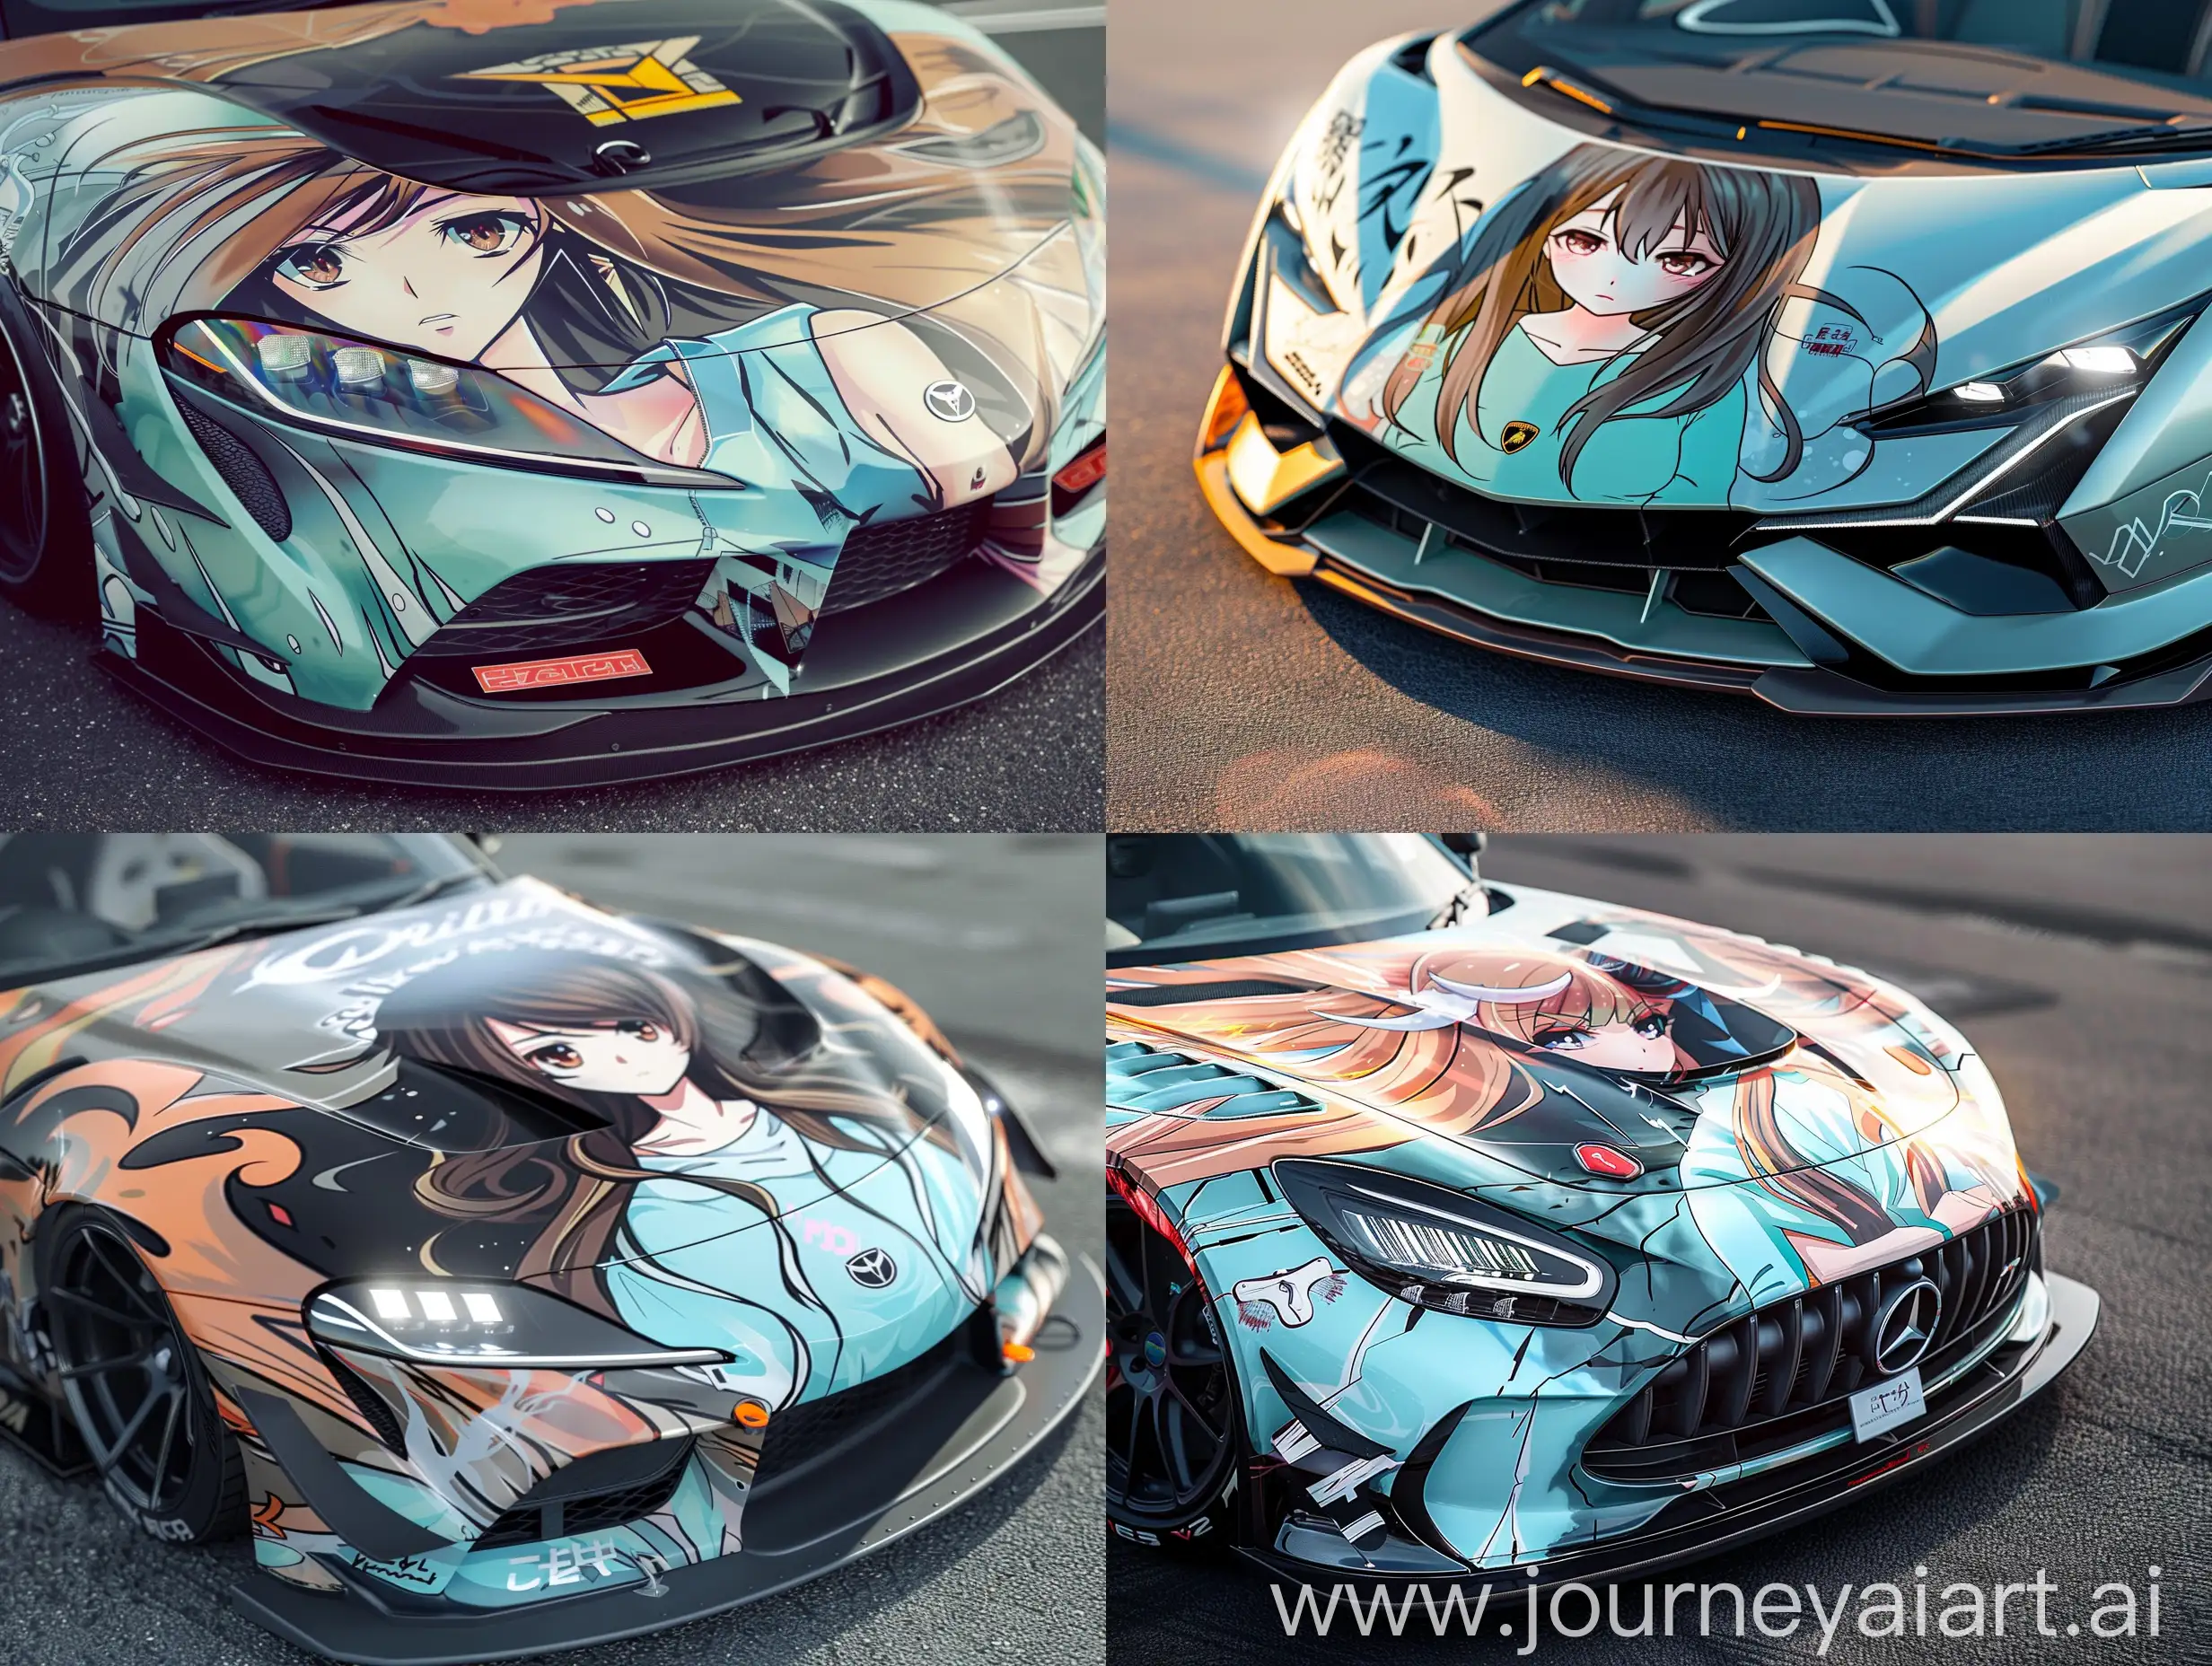 The image showcases the front end of a sports car, featuring a hyper-realistic, anime-inspired wrap on the hood by an unidentified artist. The composition highlights the car's sleek and aggressive design, with sharp headlights and a prominent logo. The subject of the wrap is a young woman with long, flowing hair, wearing a light blue outfit, creating a striking contrast against the car's surface. The background shows the car on an asphalt surface, suggesting a setting suitable for a photo shoot. The vivid colors of the wrap stand out, drawing attention to the detailed and expressive illustration amidst the otherwise monochromatic environment.